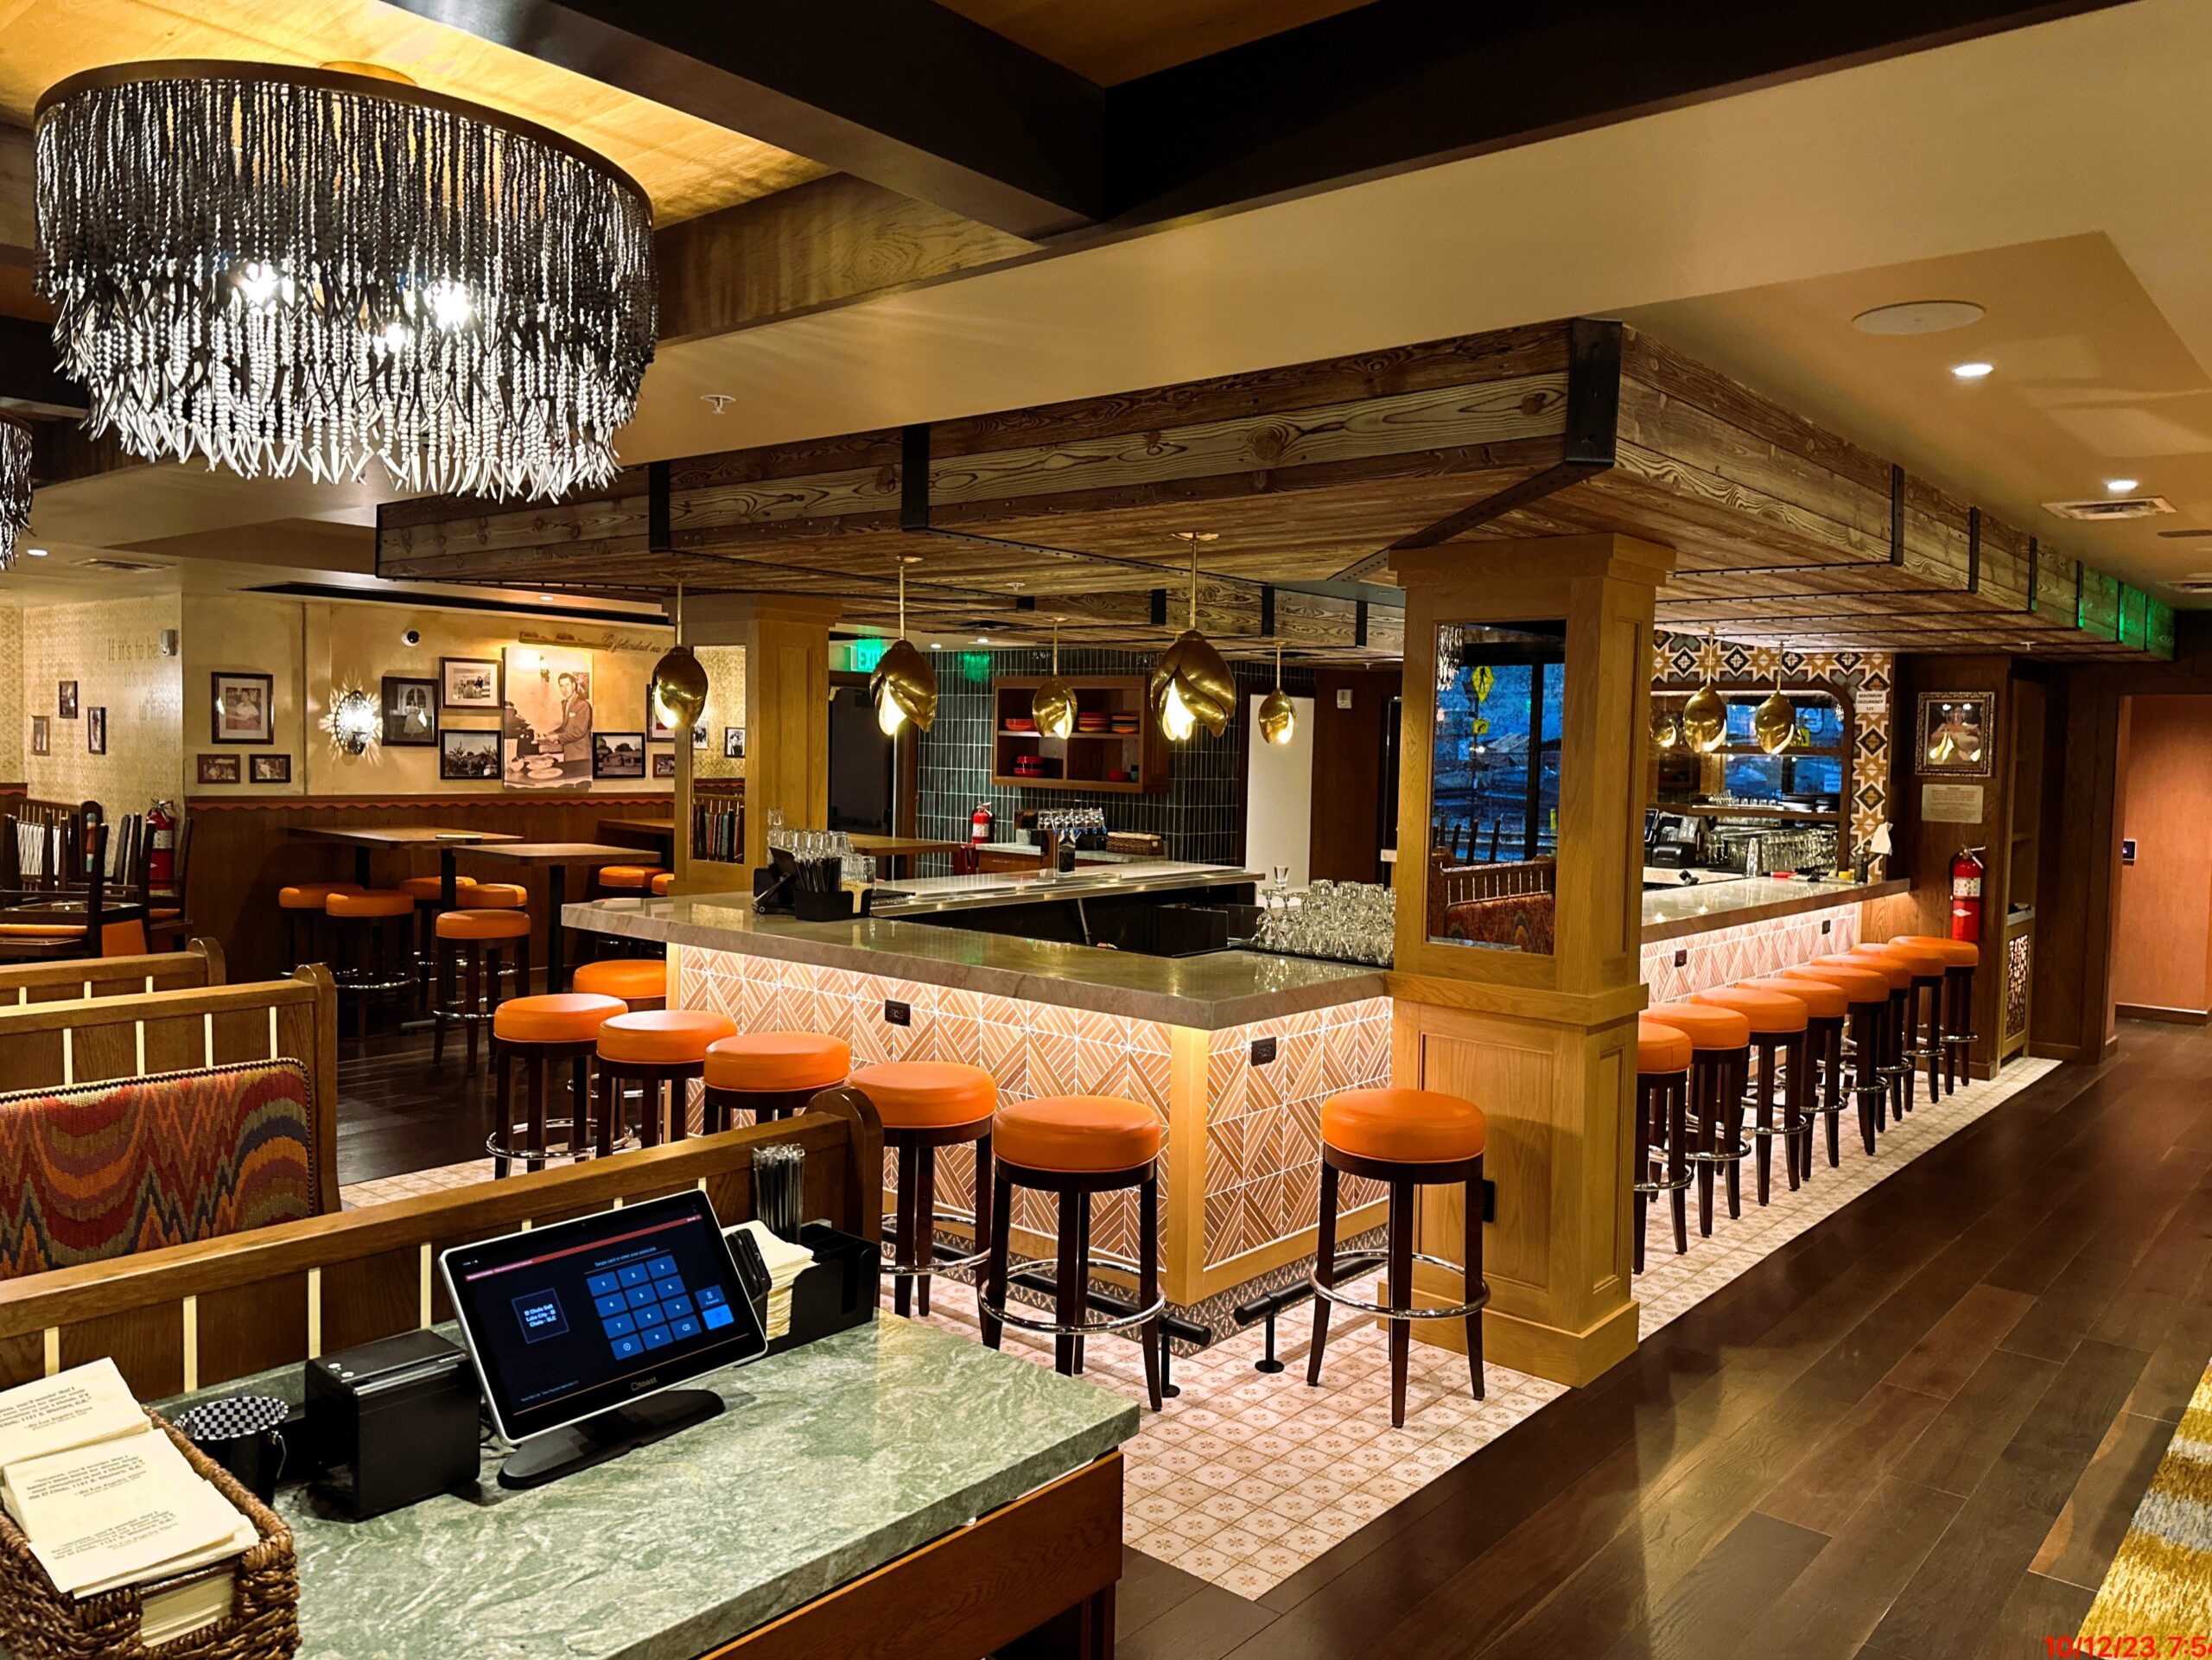 Paulsen Construction Completes El Cholo Restaurant for Grand Re-Opening